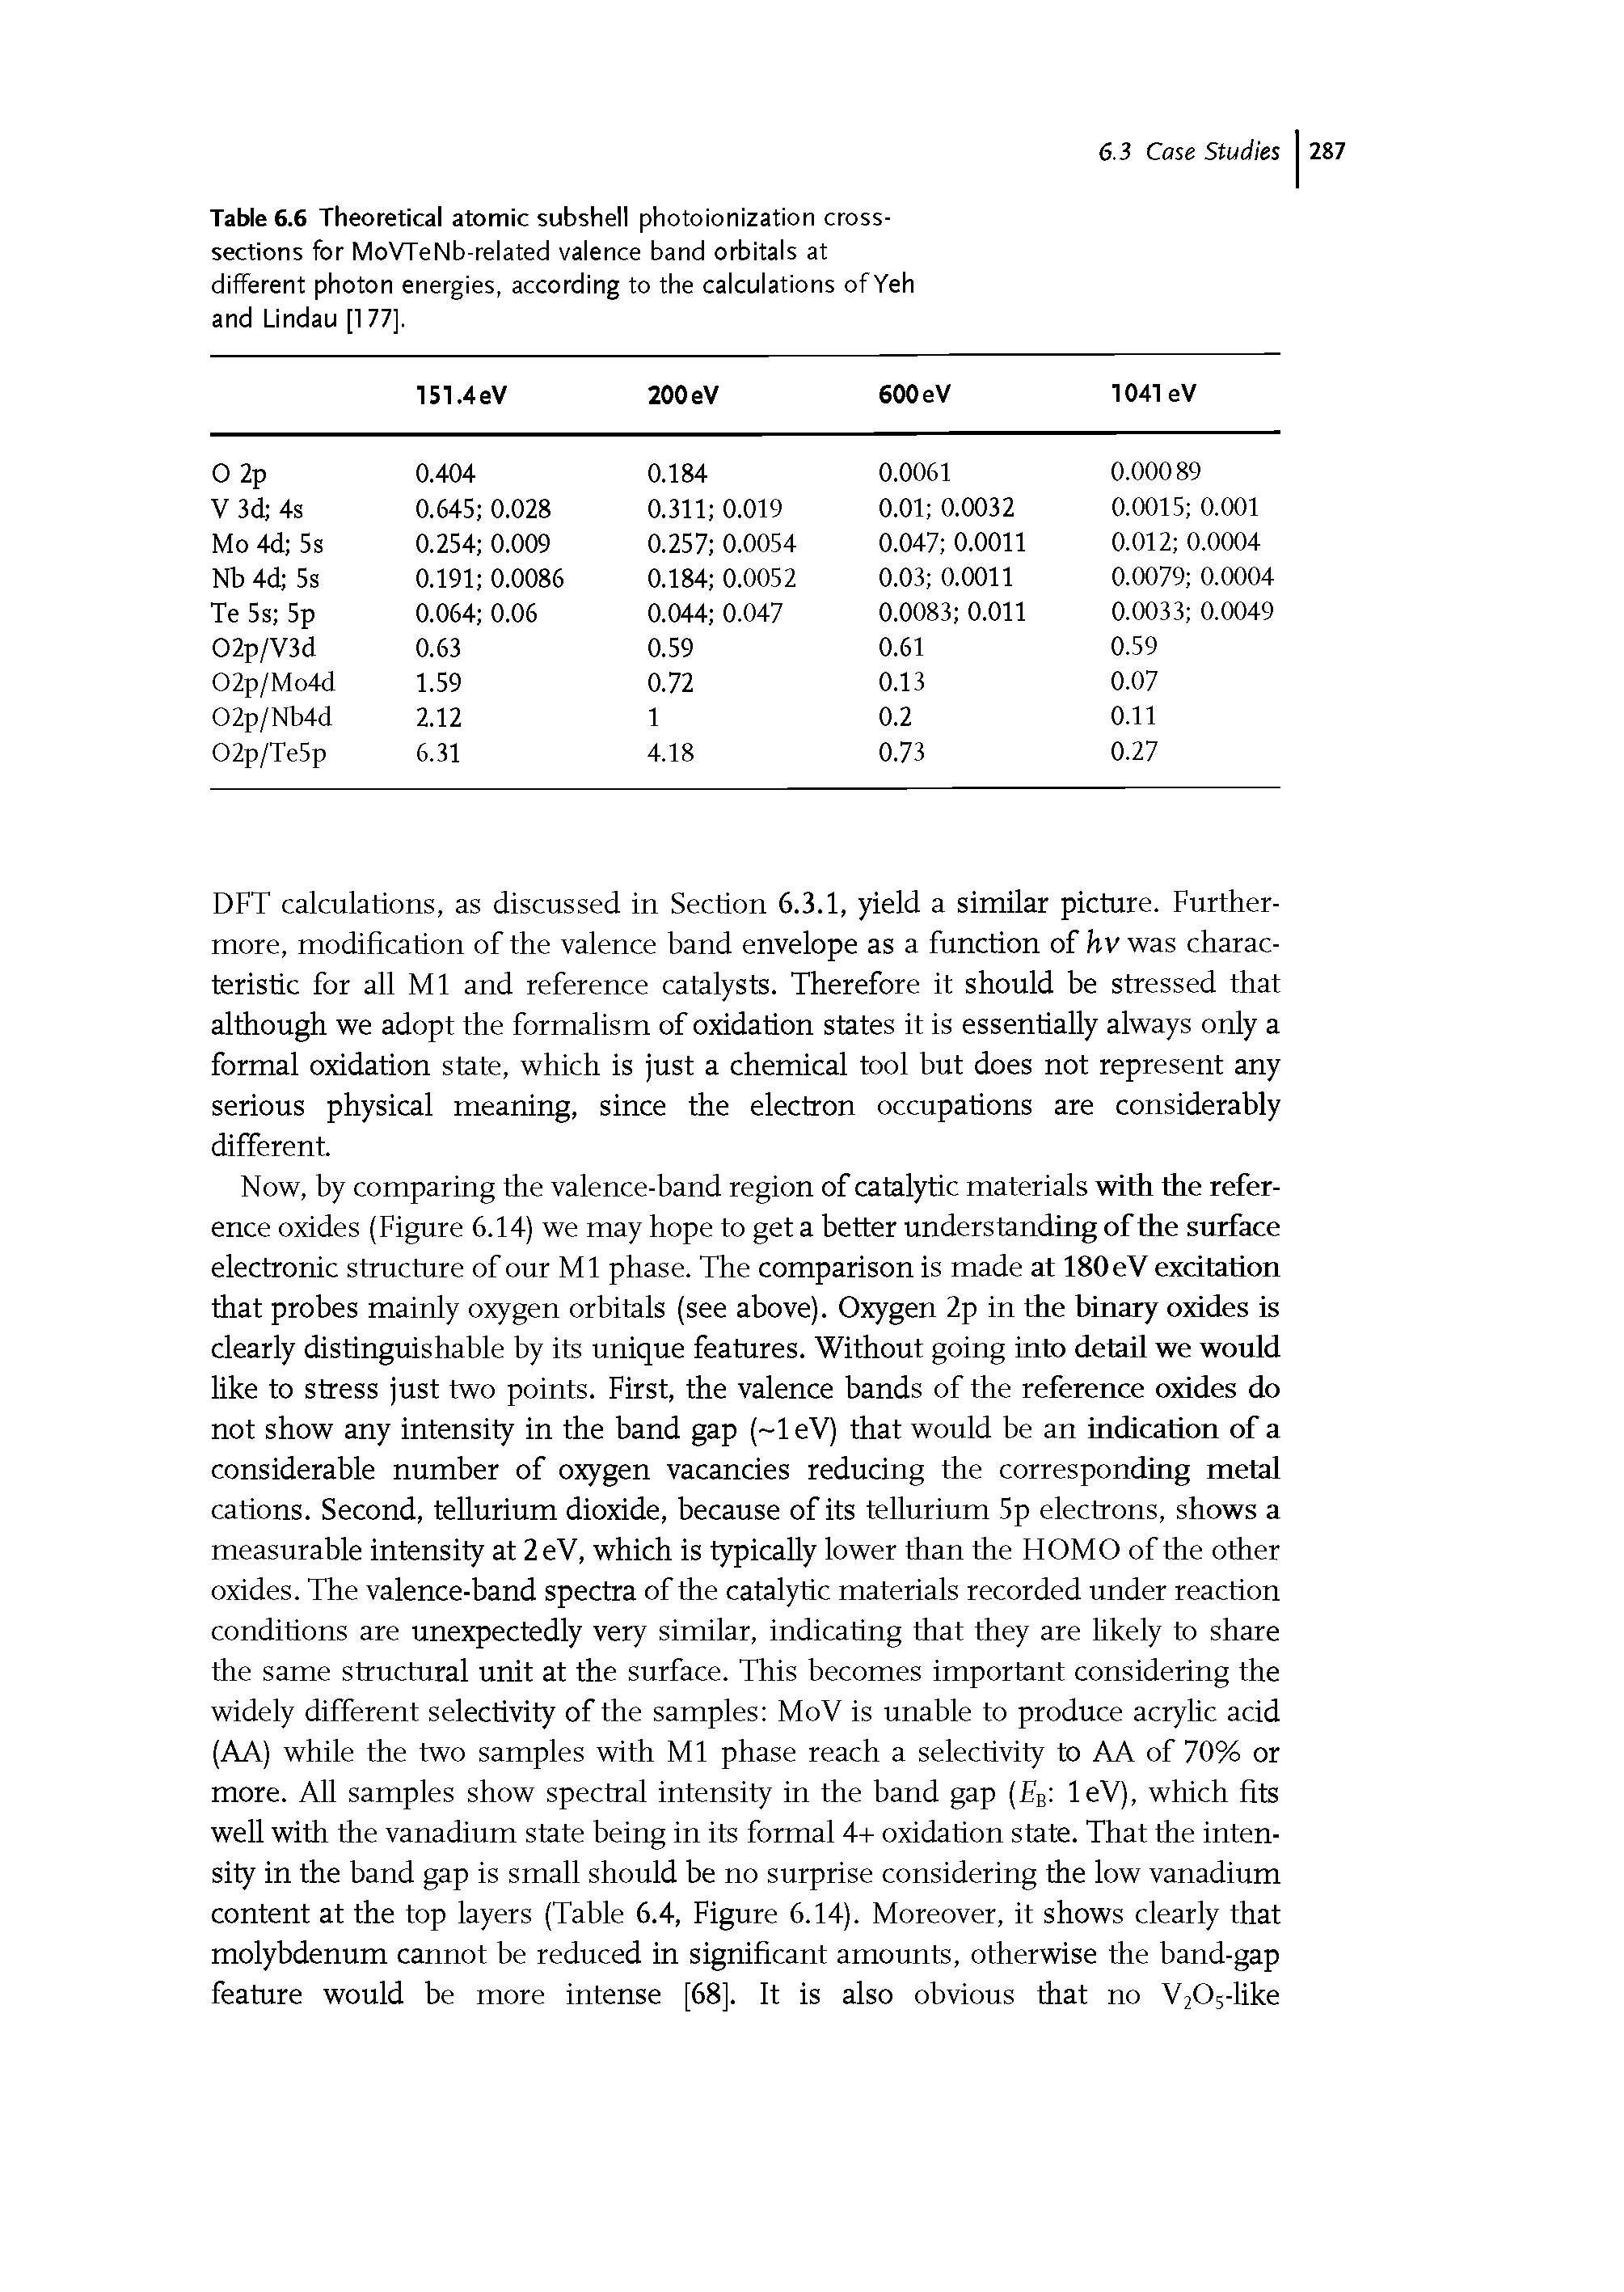 Table 6.6 Theoretical atomic subshell photoionization cross-sections for MoVTeNb-related valence band orbitals at different photon energies, according to the calculations ofYeh and Lindau [177].